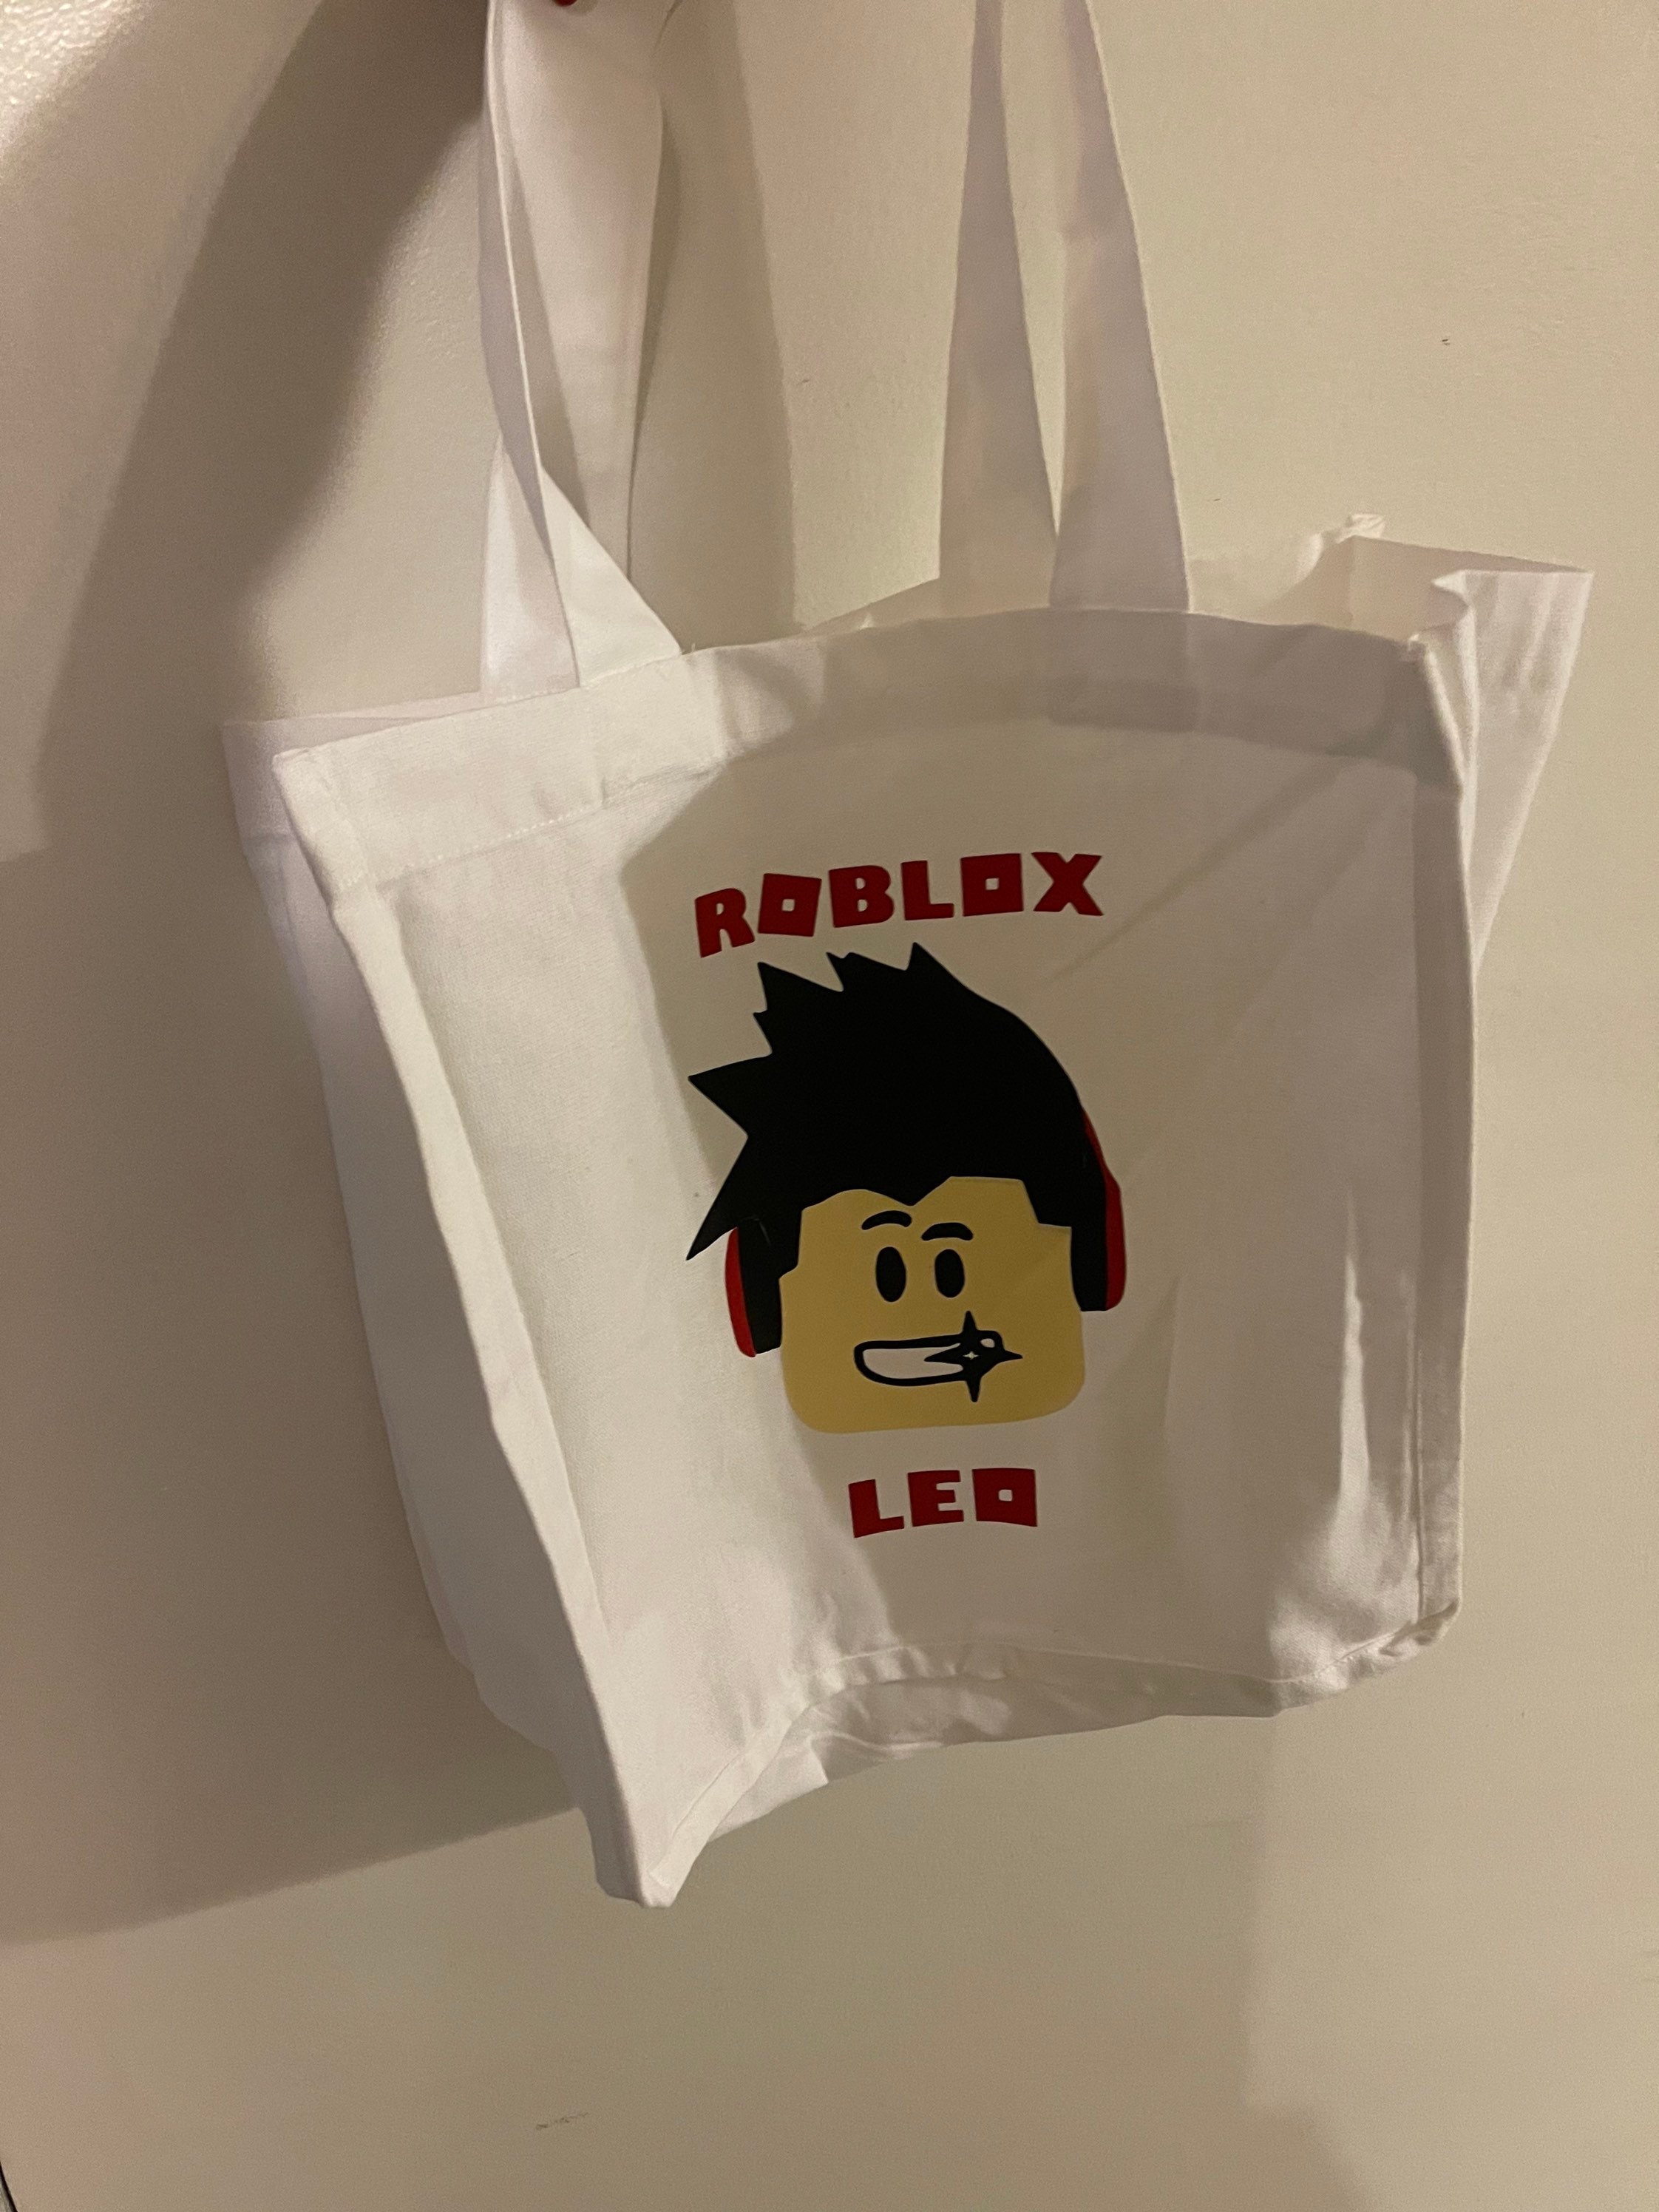 Free Robux Generator Roblox Free Robux Codes Weekender Tote Bag by